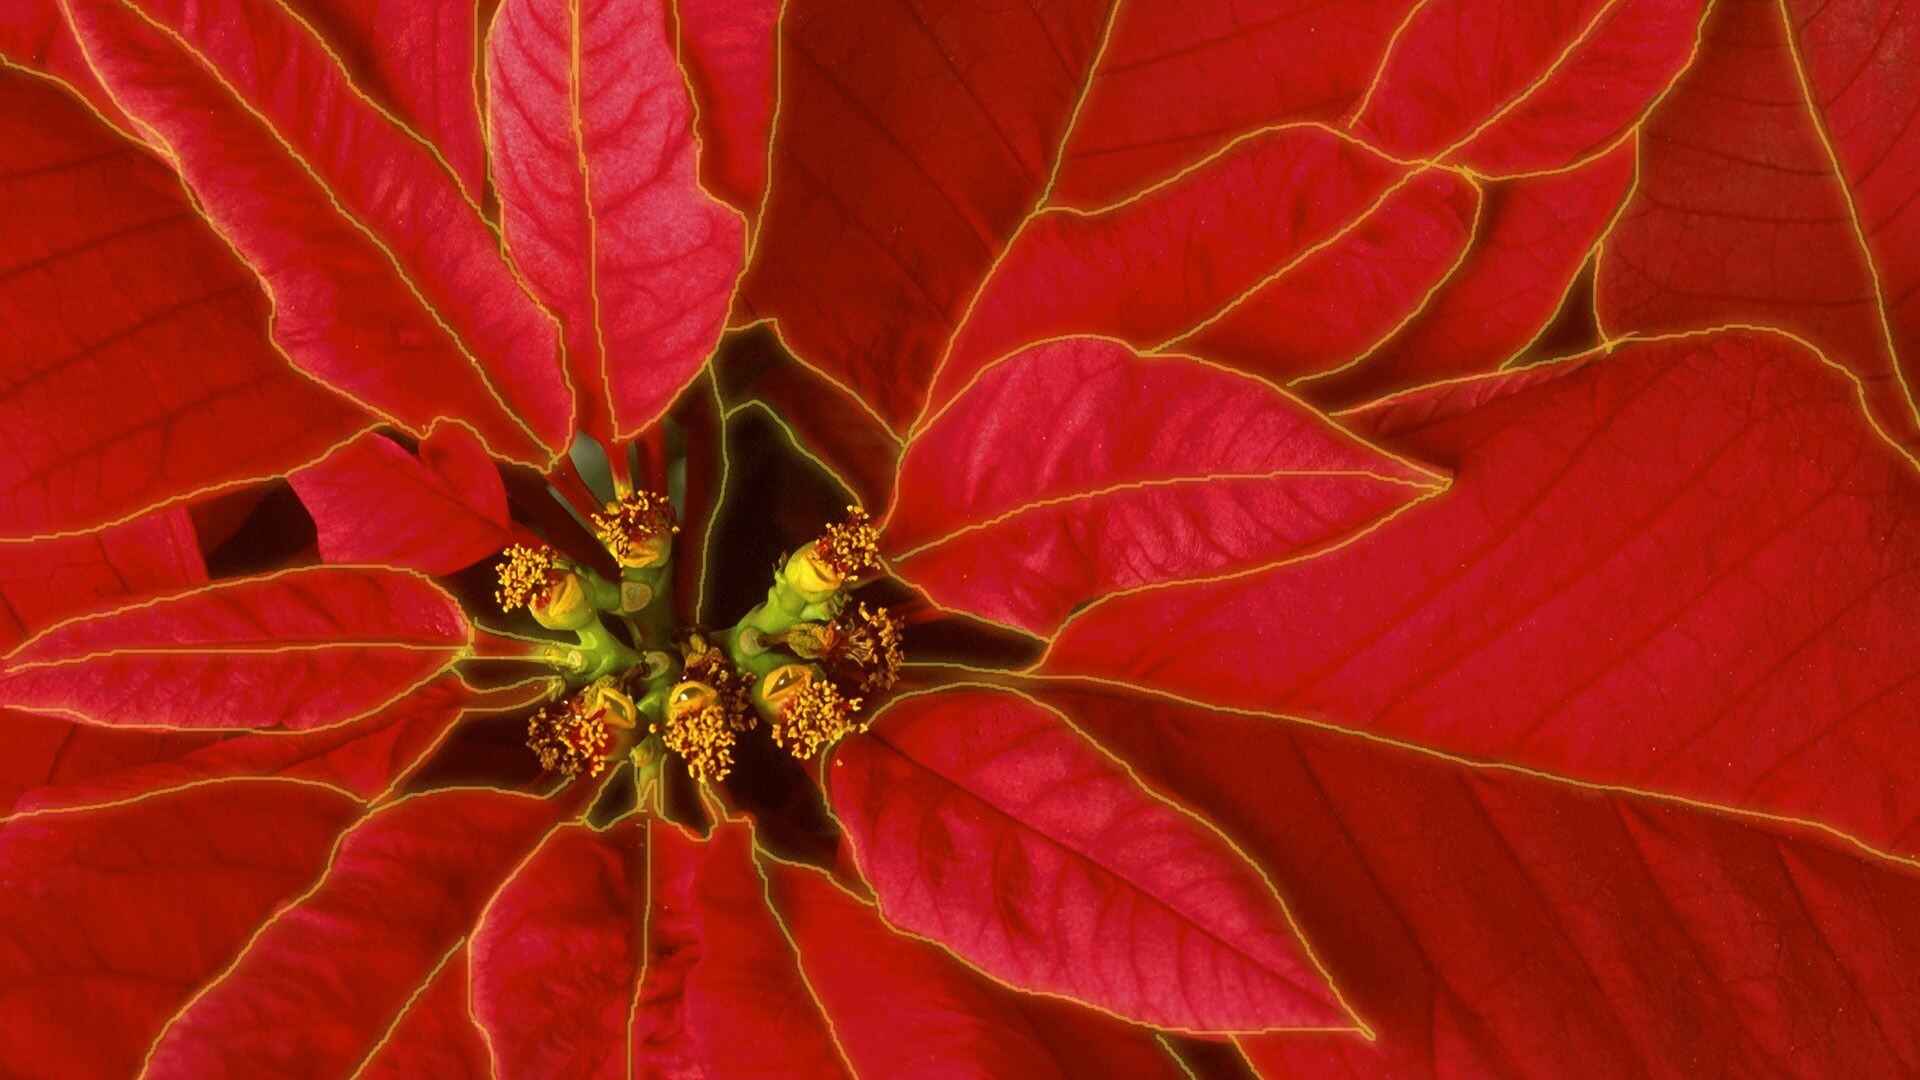 Poinsettia: The most popular holiday plant in the United States, Christmas ideas. 1920x1080 Full HD Wallpaper.